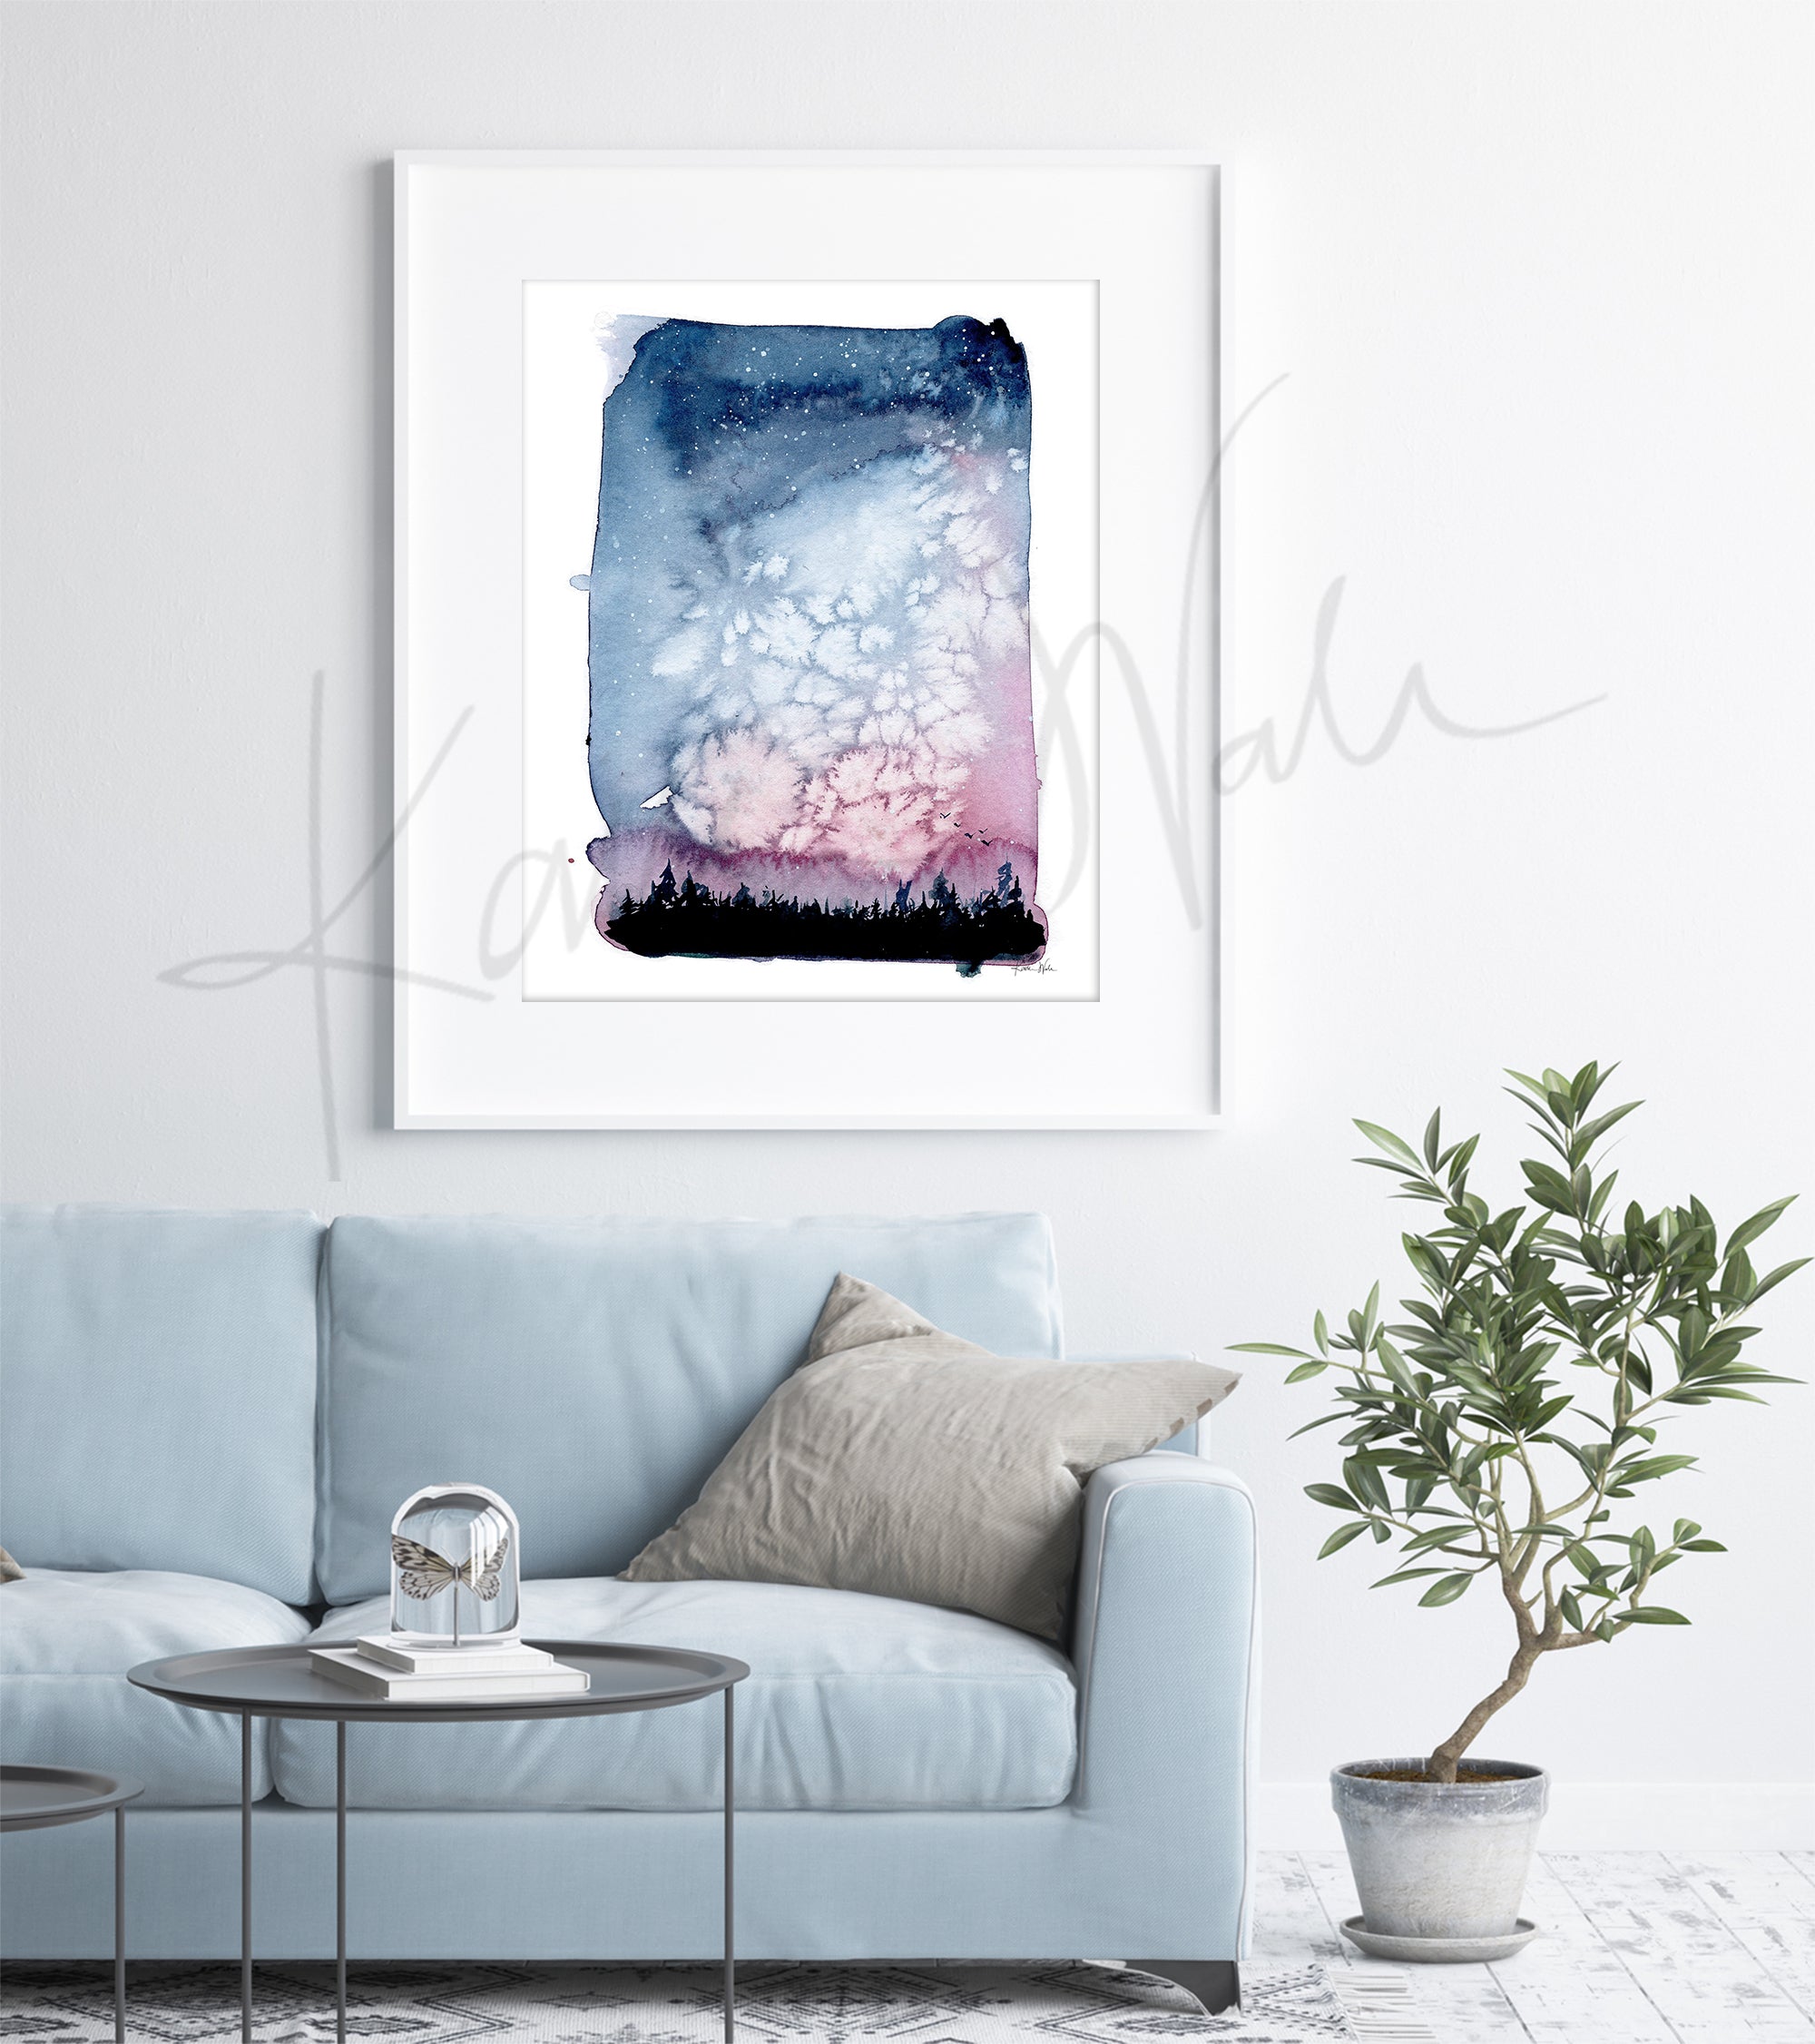 Framed watercolor painting of a beautiful night sky with silhouetted trees. The painting is hanging over a blue couch.